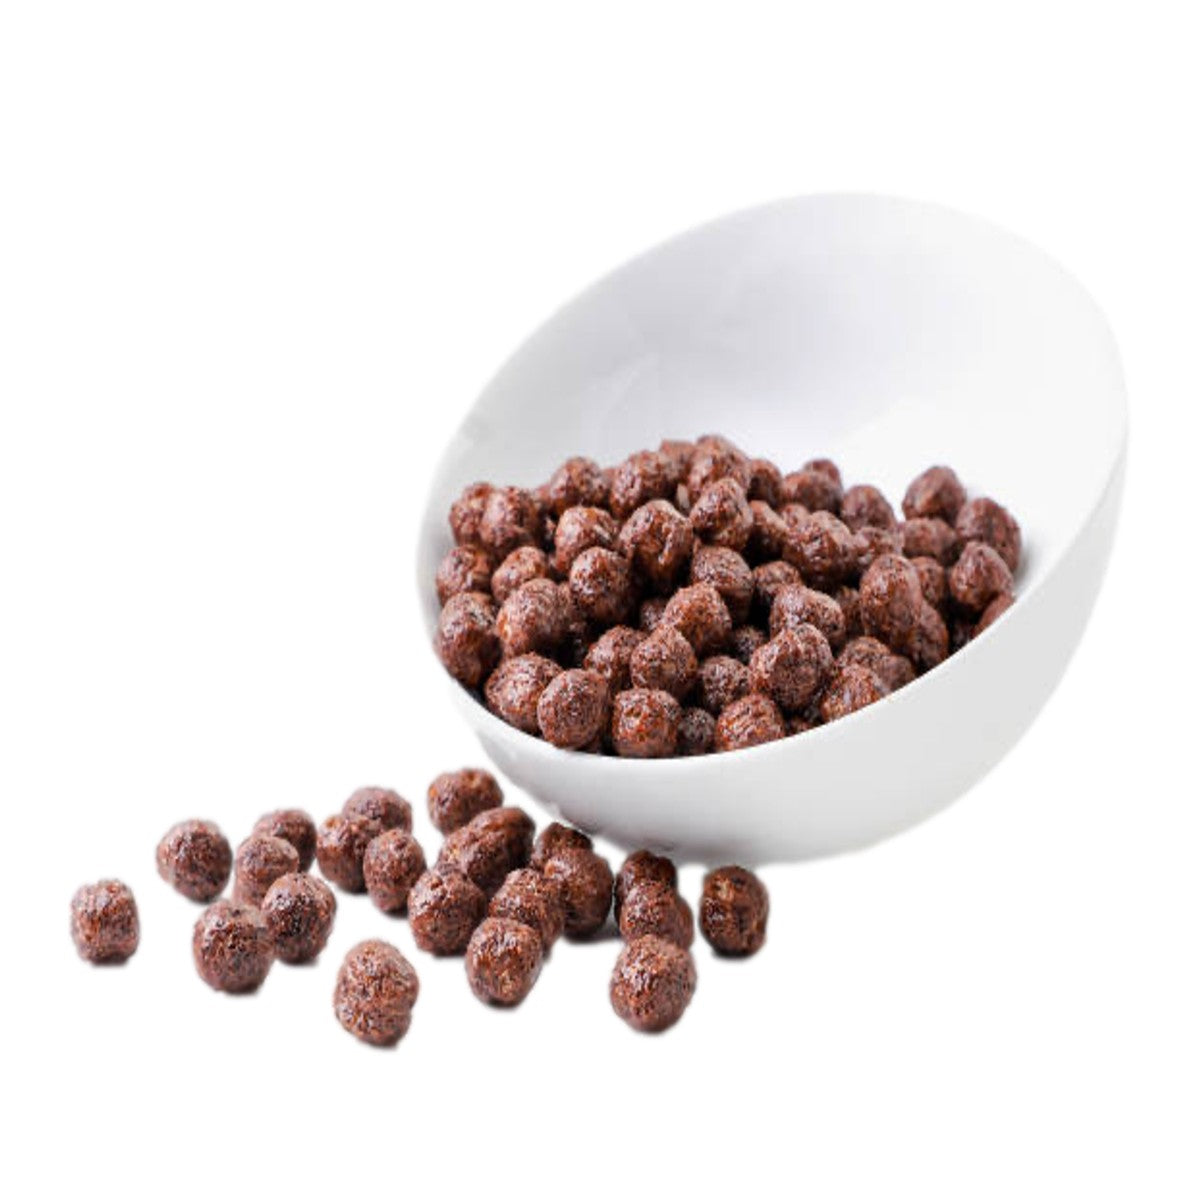 Delta 8 Cereal Chocolate balls cereal